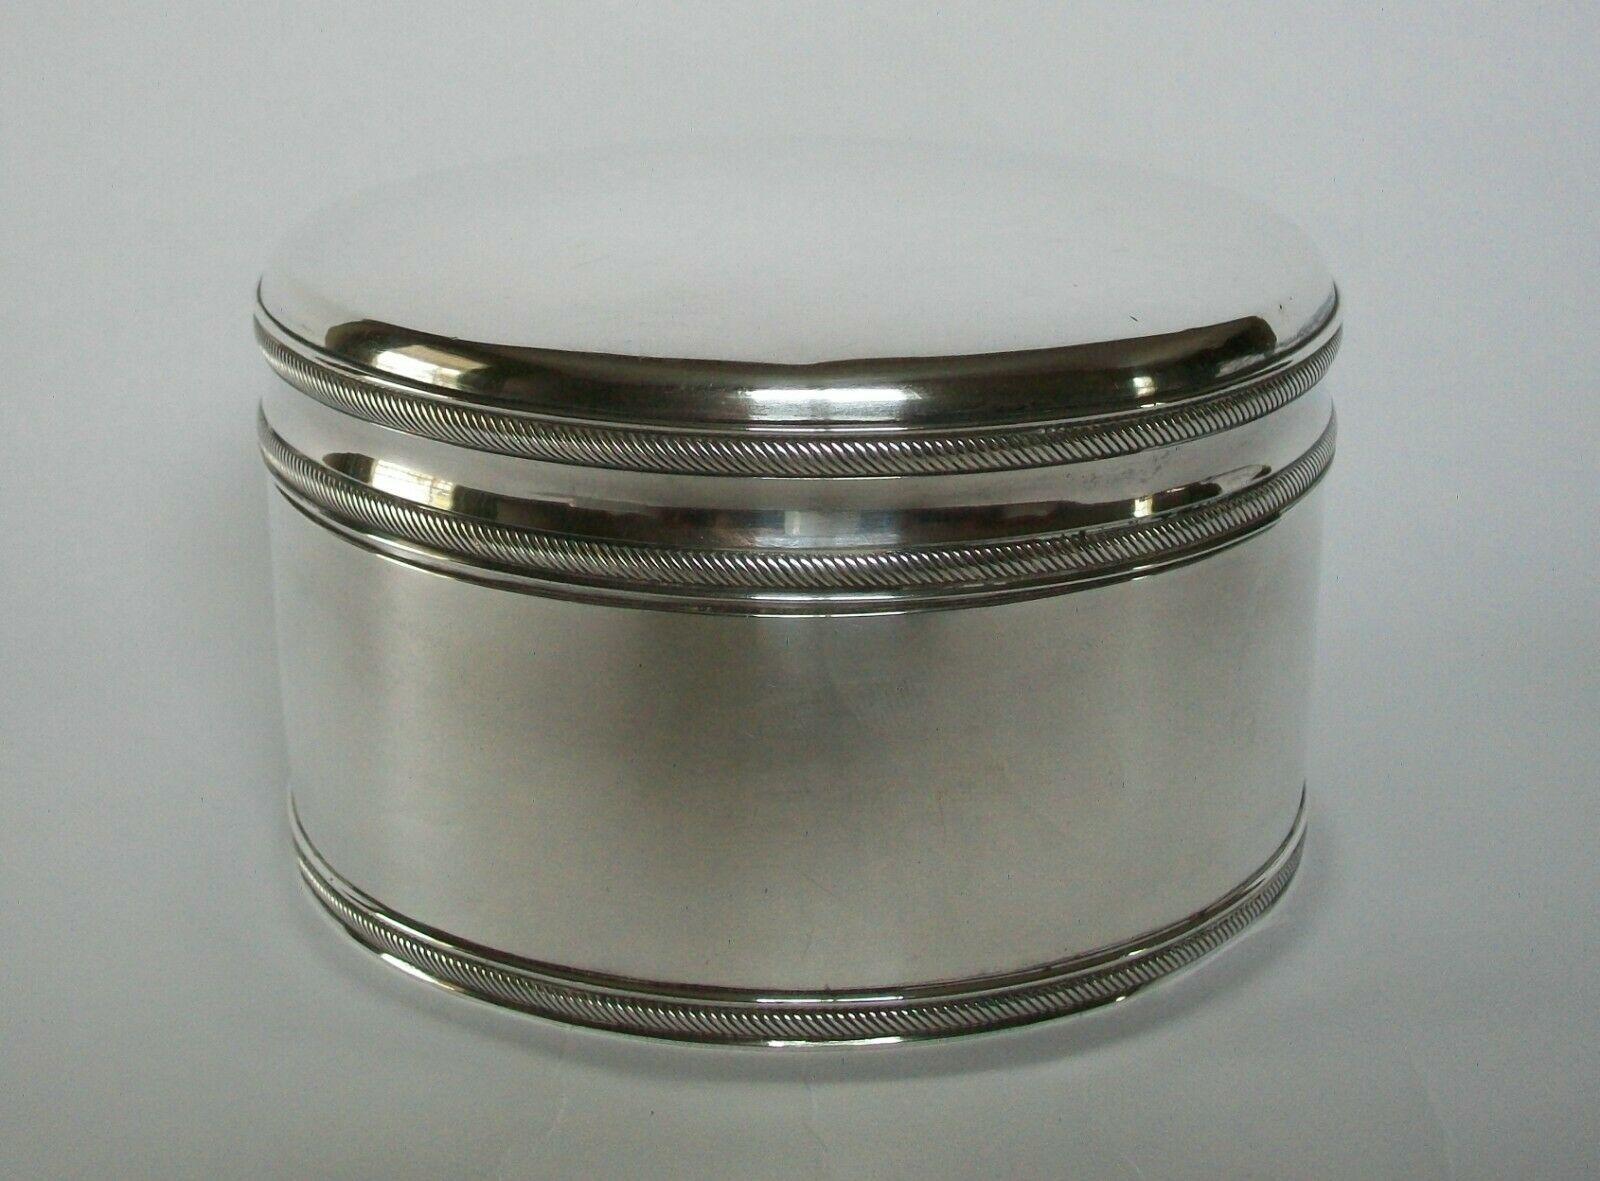 GEORGE REEVERS (Maker - Silversmith) - Extraordinary and rare Dutch fine silver round biscuit box - 934/1000 silver - finest quality and timeless design (nearly 200 years old) - classic rope twist borders (two to the top and one to the base) -